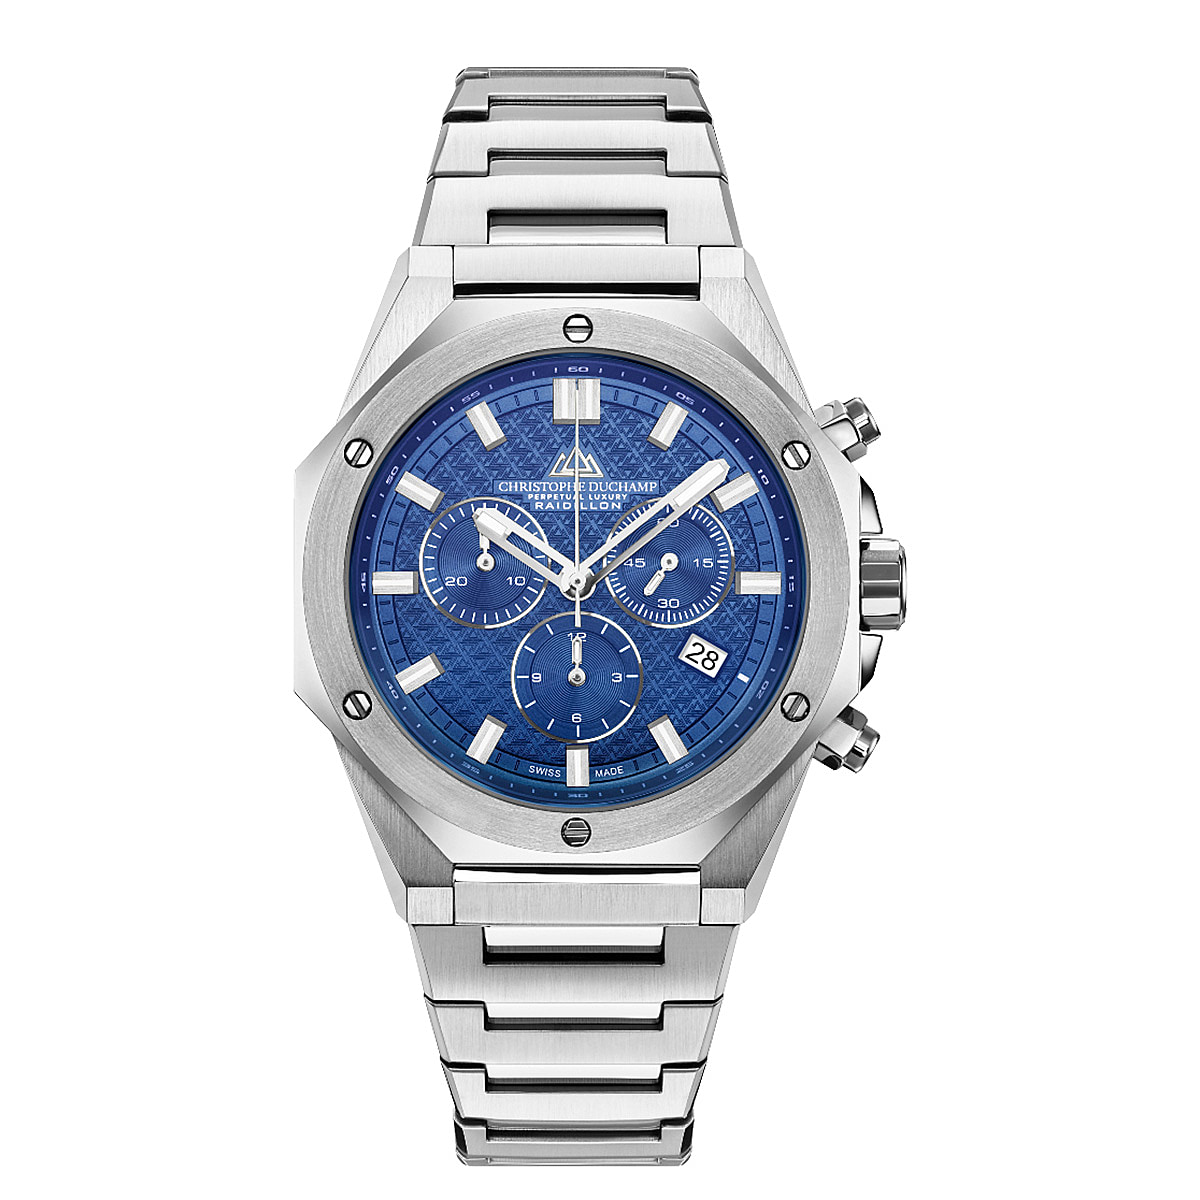 Christophe-Duchamp-Automatic-Mens-Watch-in-Stainless-Steel